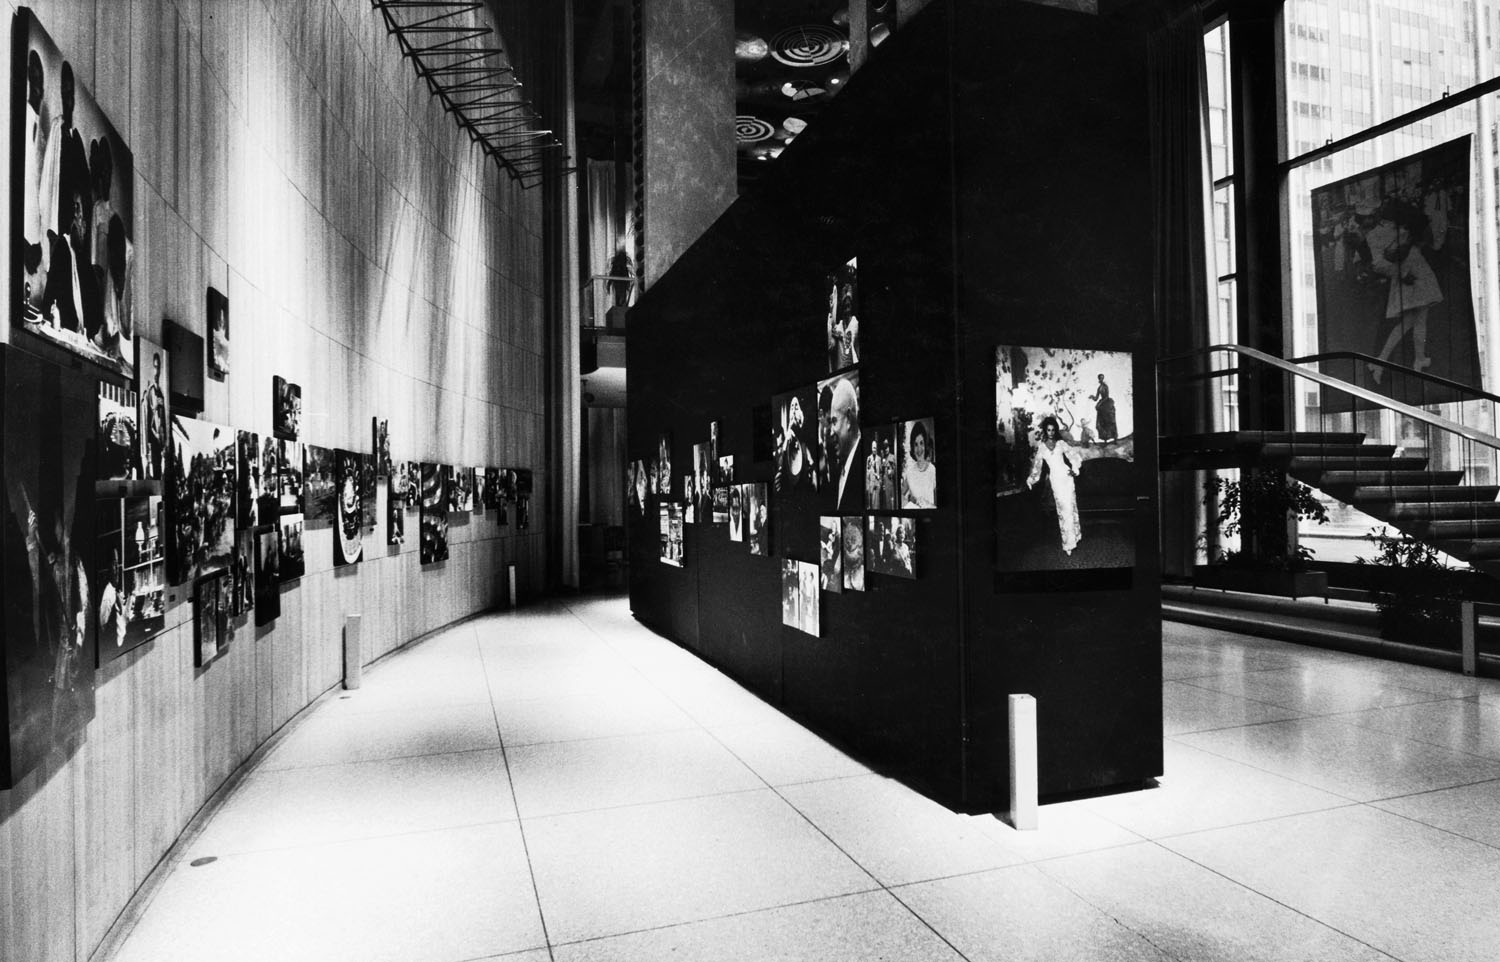 ...or check out an exhibit of Alfred Eisenstaedt's photographs hanging on the walls of the lobby.